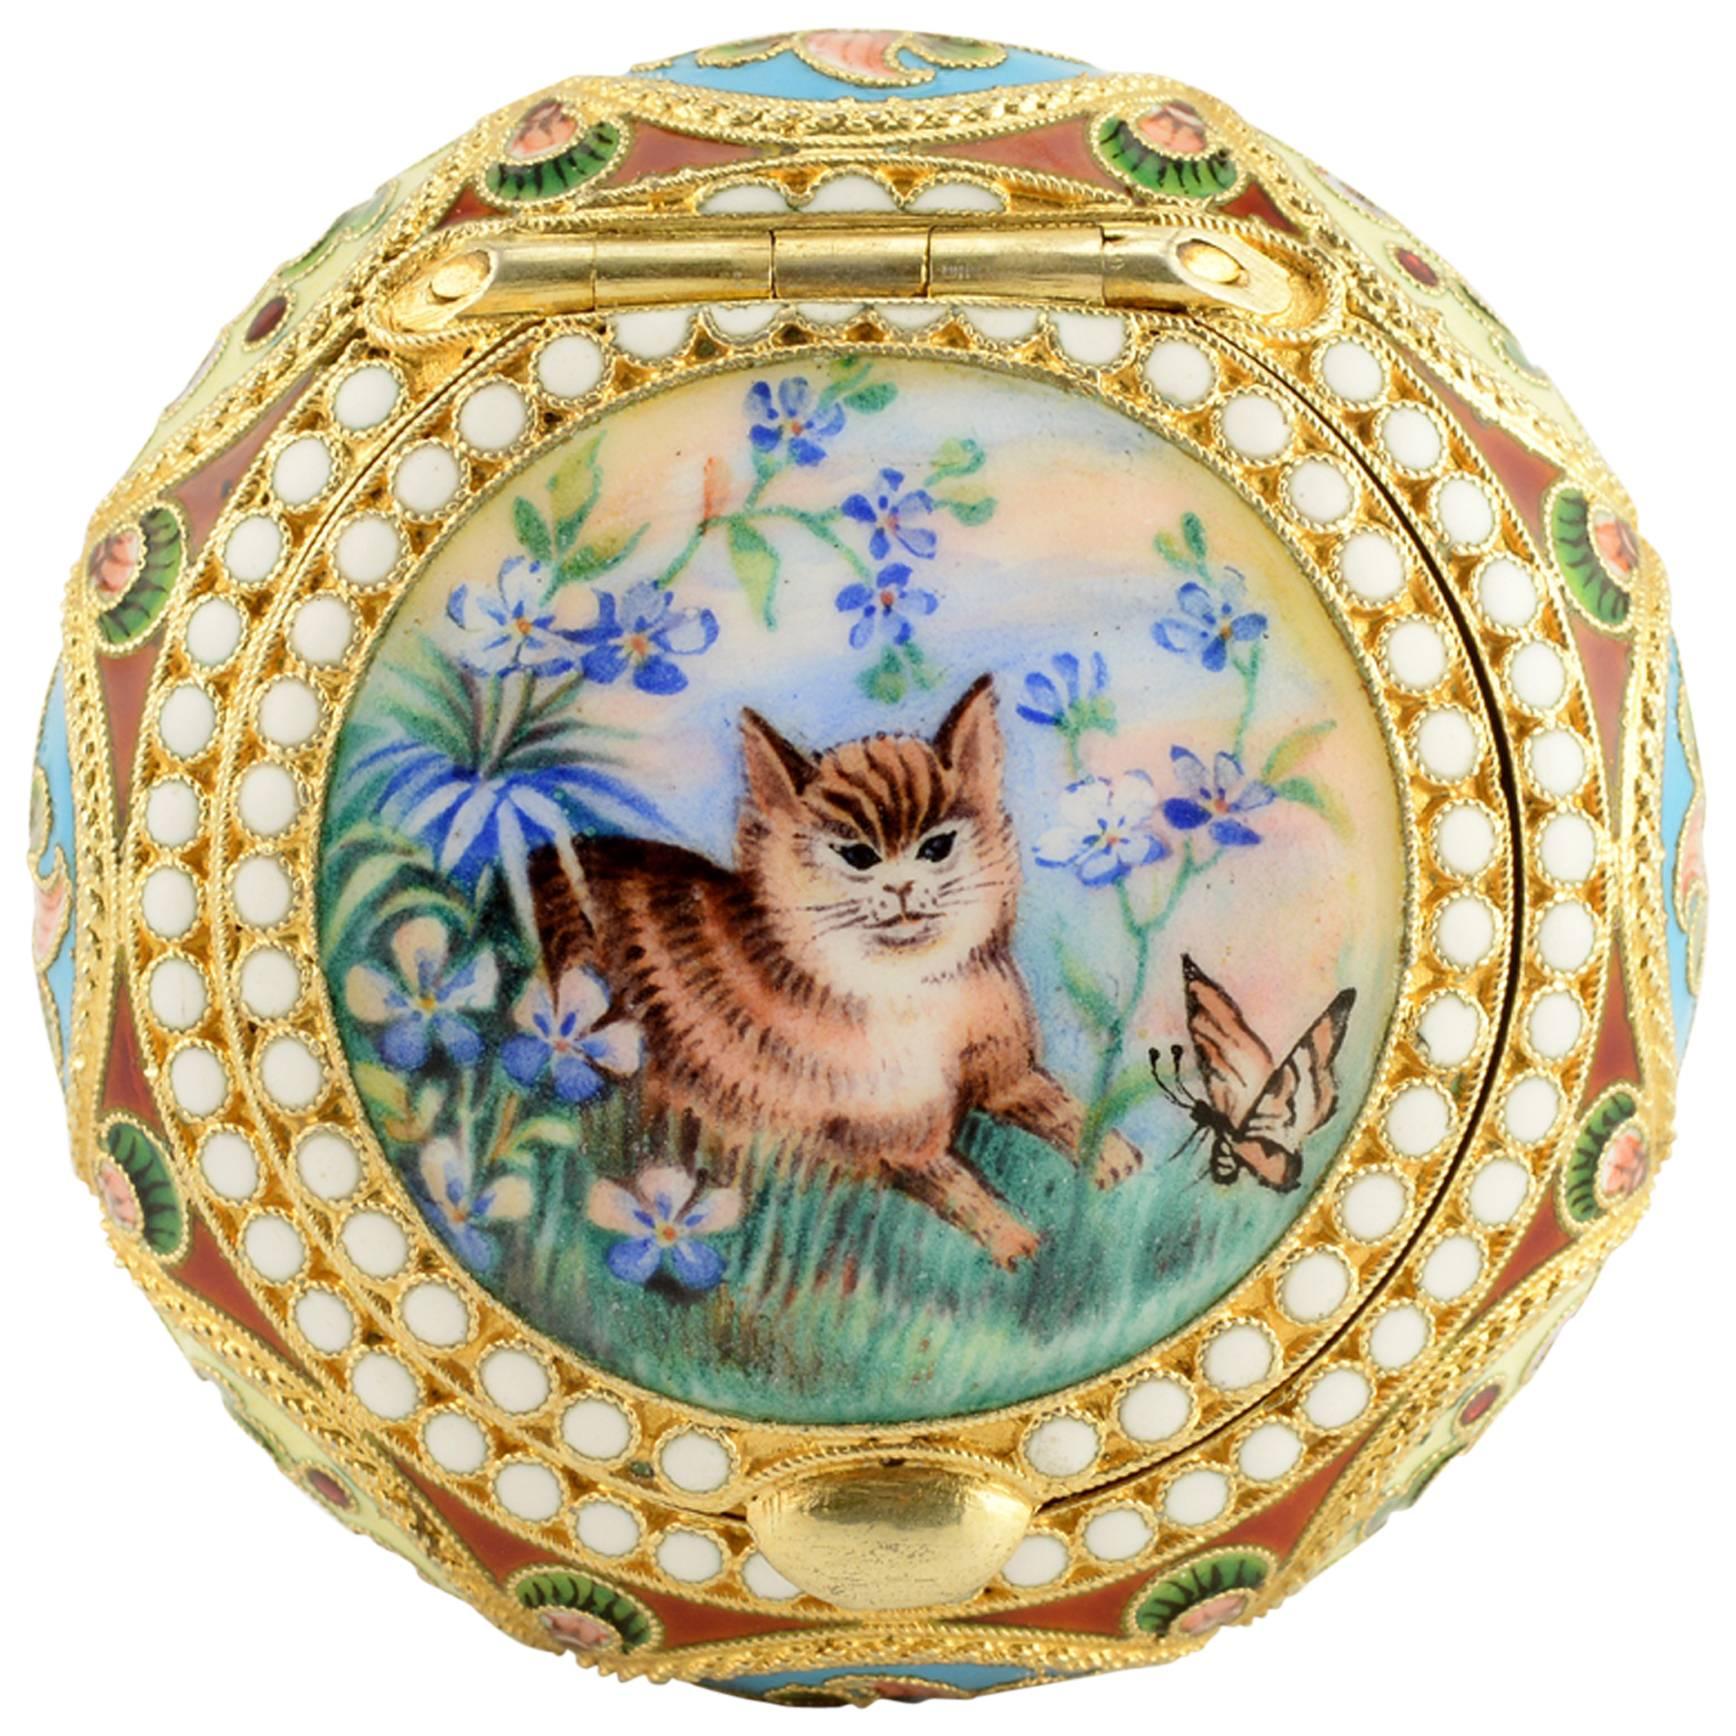 Russian Shaded and Pictorial Enamel Pill or Pastille Box with a Cat